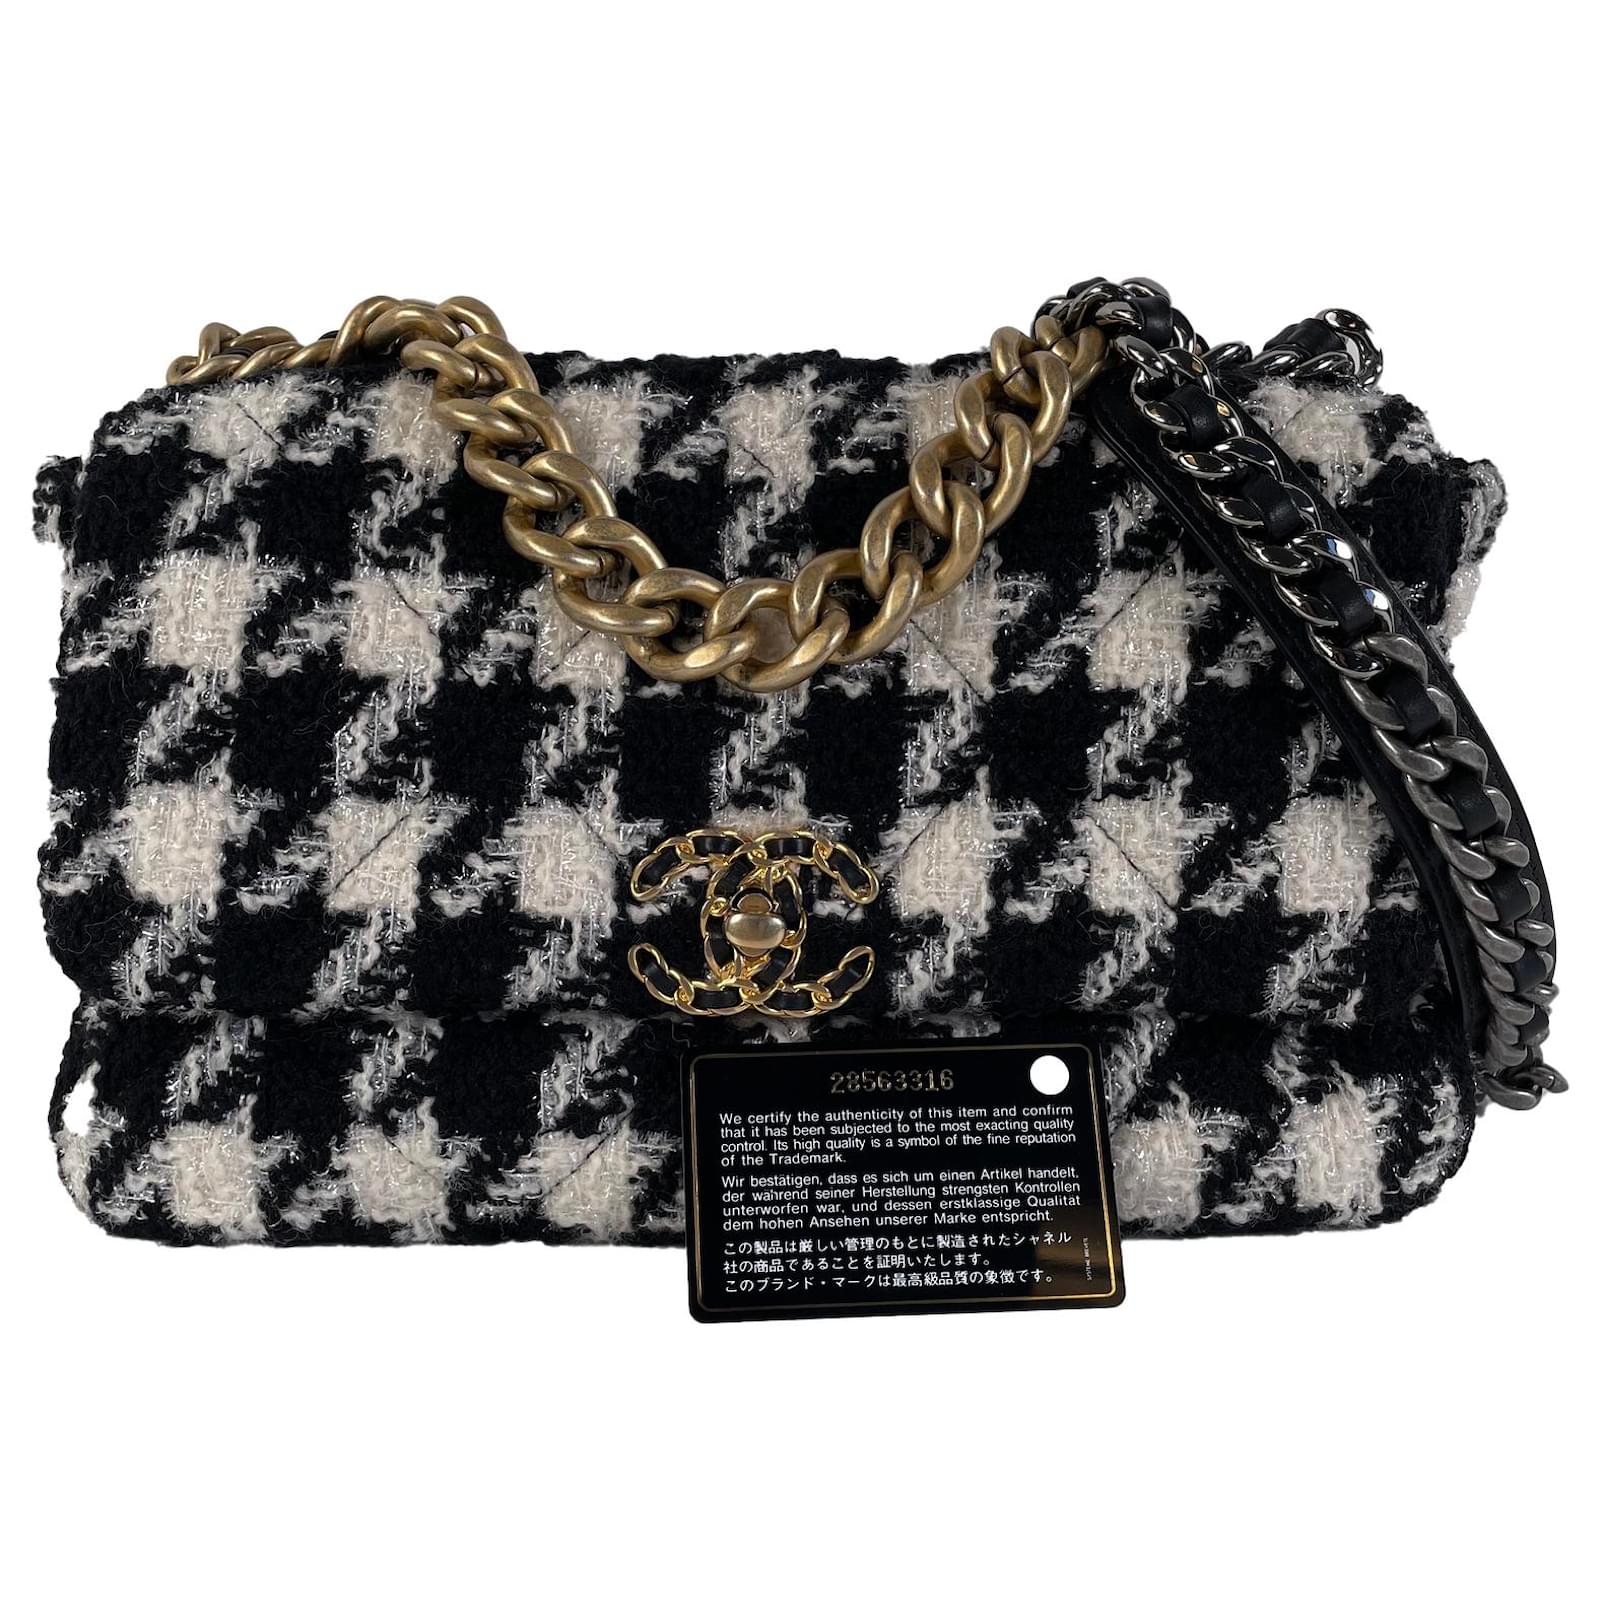 Chanel CC Quilted Leather Single Flap Bag Black Pony-style